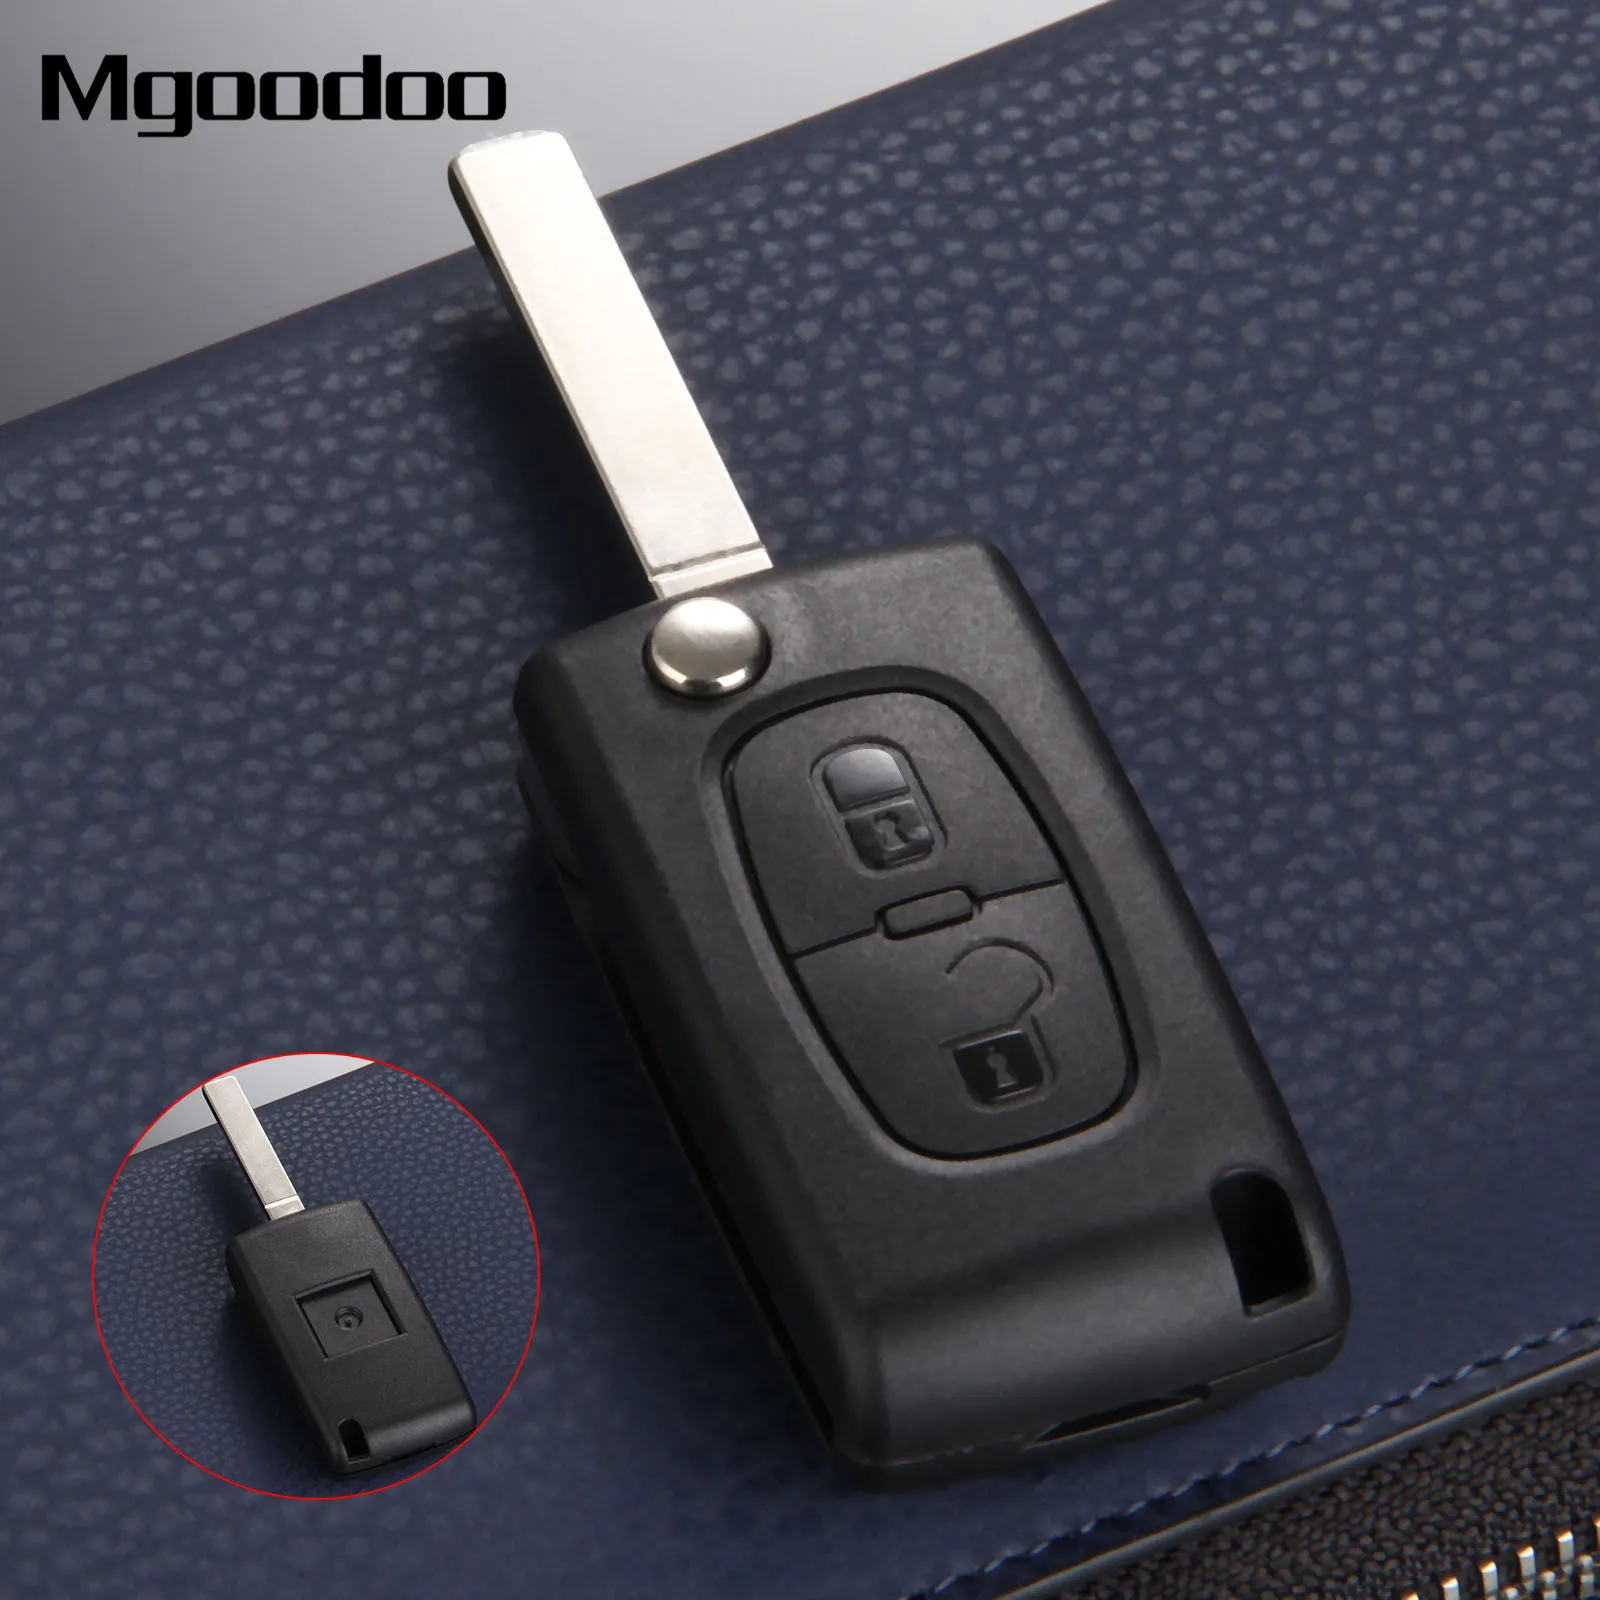 

Mgoodoo 2 Buttons Flip Folding Remote Car Key Shell Case Cover For Citroen C2 C3 C5 Blank Blade Replacement Key Entry Fob